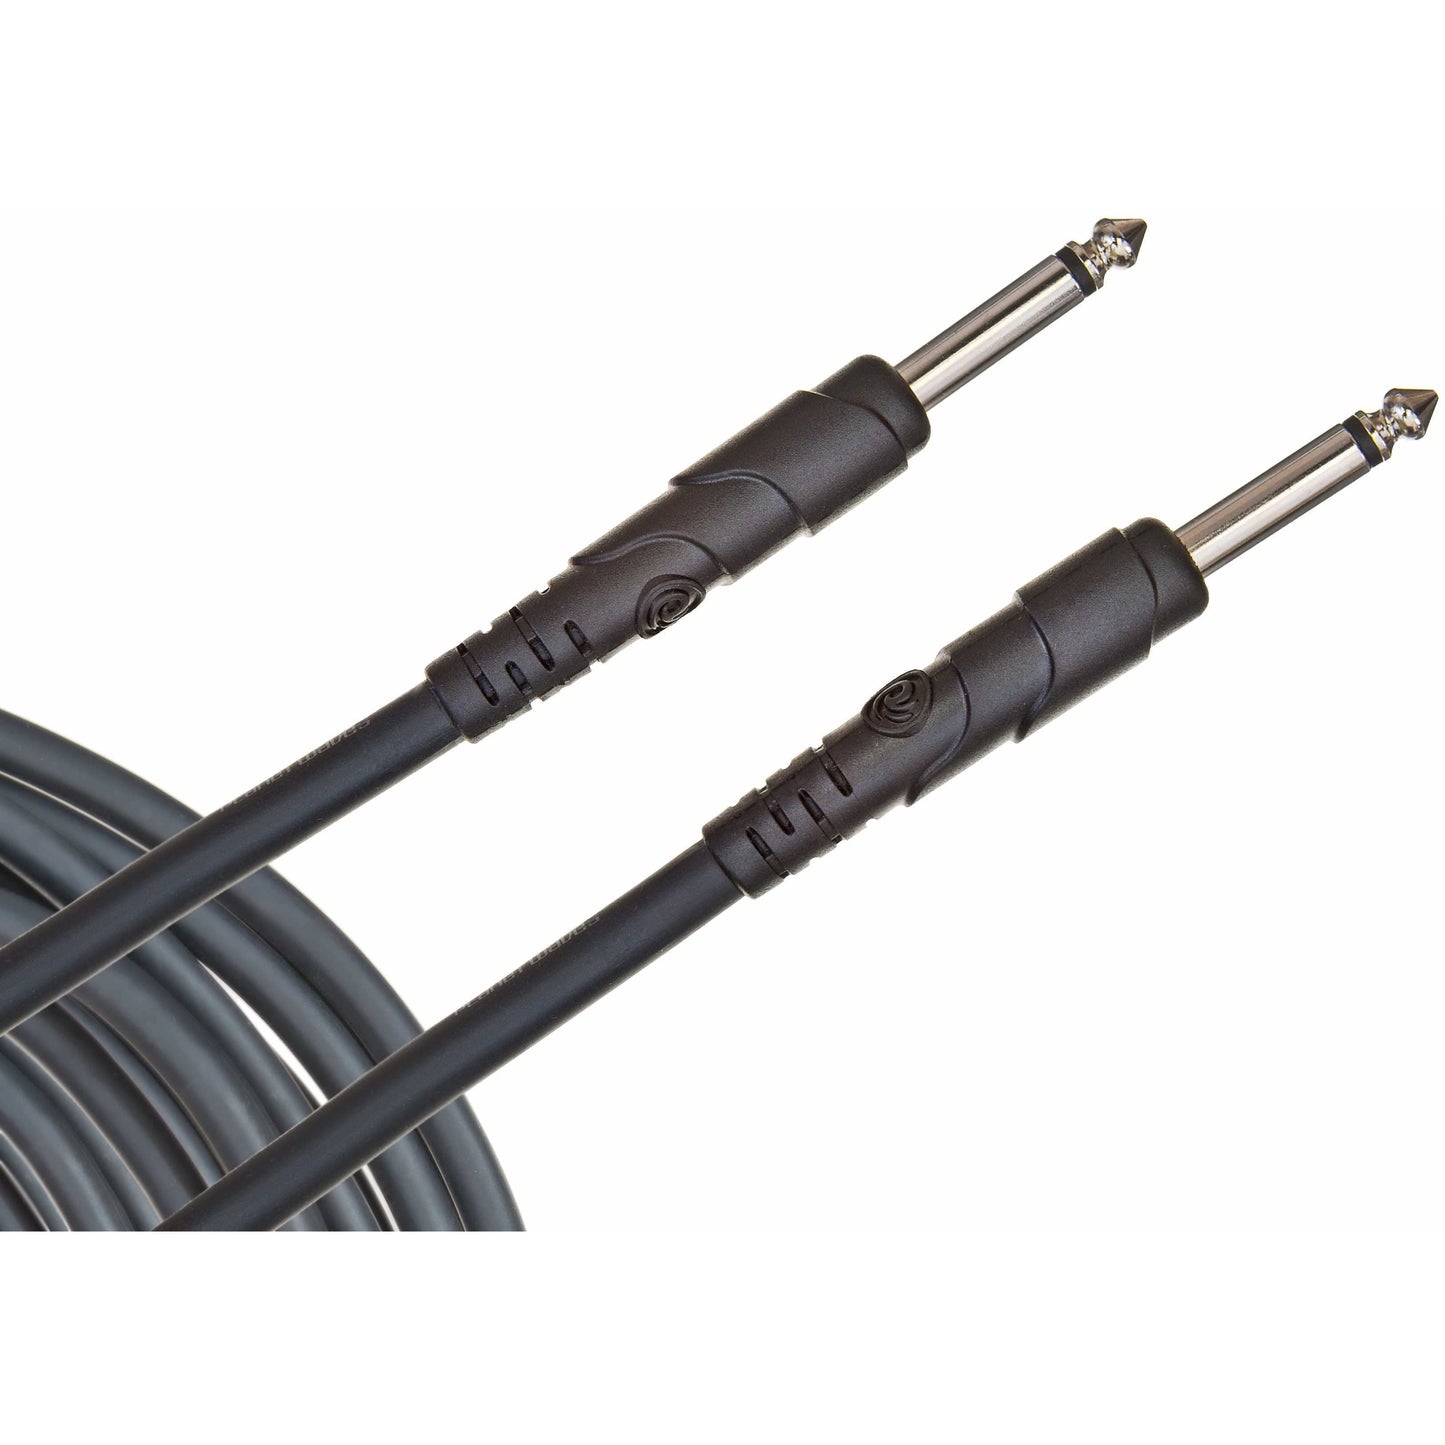 1/4 inch jacks of D'Addario Planet Waves 15' Classic Series Instrument Cable